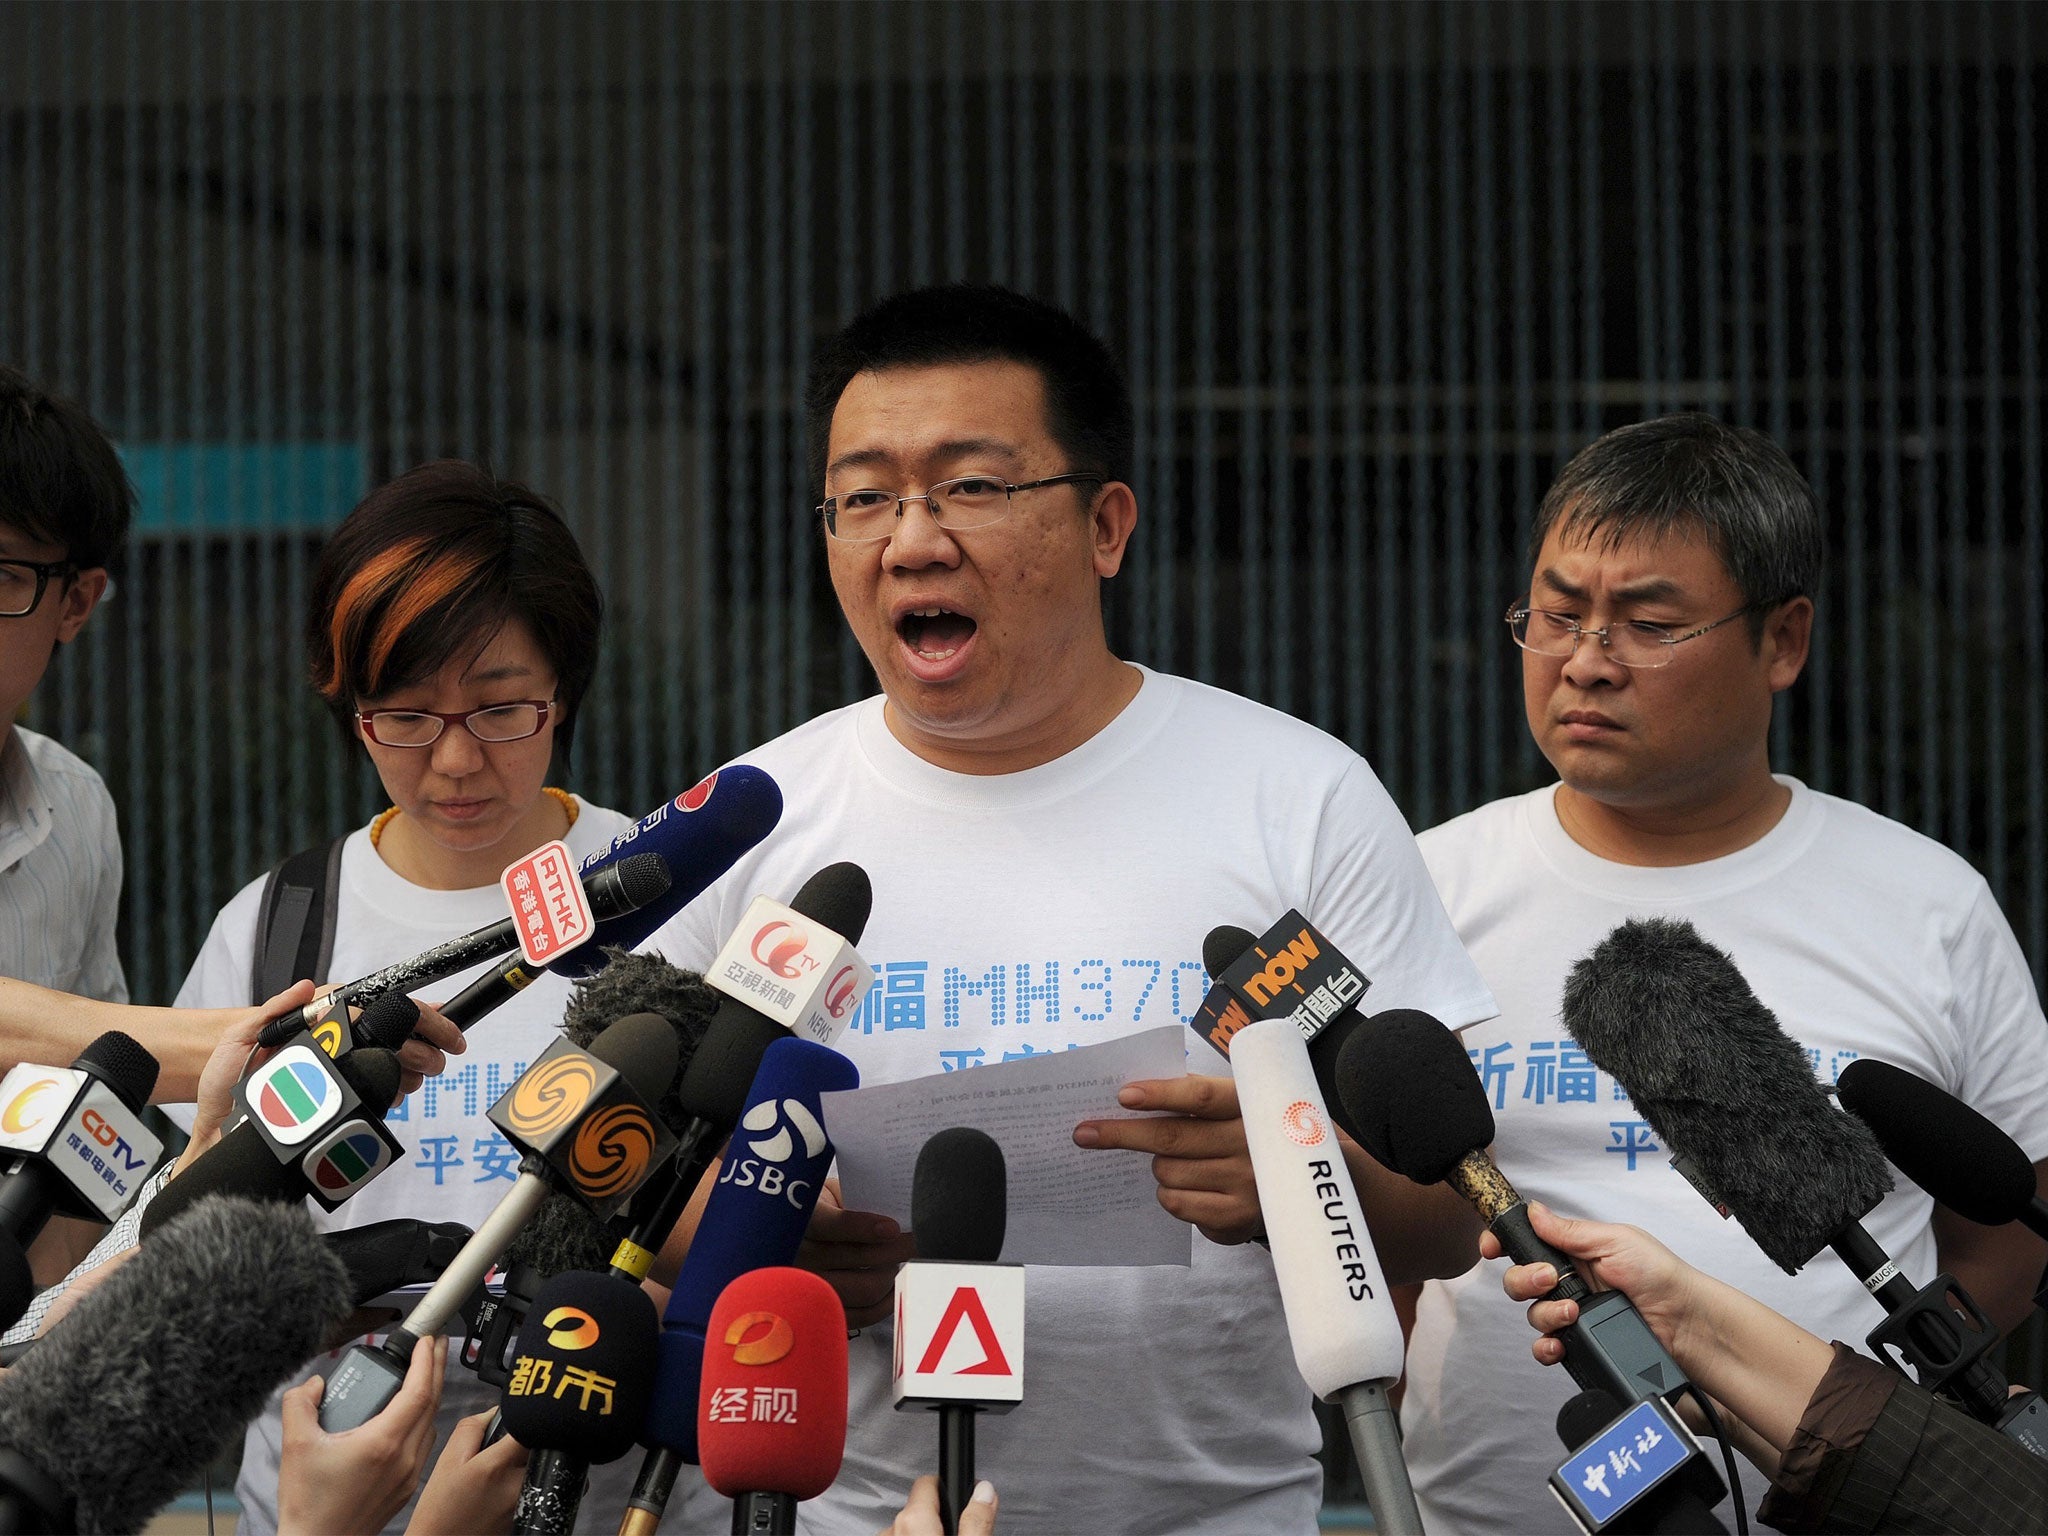 A relative of passengers on the missing Malaysia Airlines flight MH370 speaks to the media at the Metro Park Lido Hotel in Beijing on 26 March